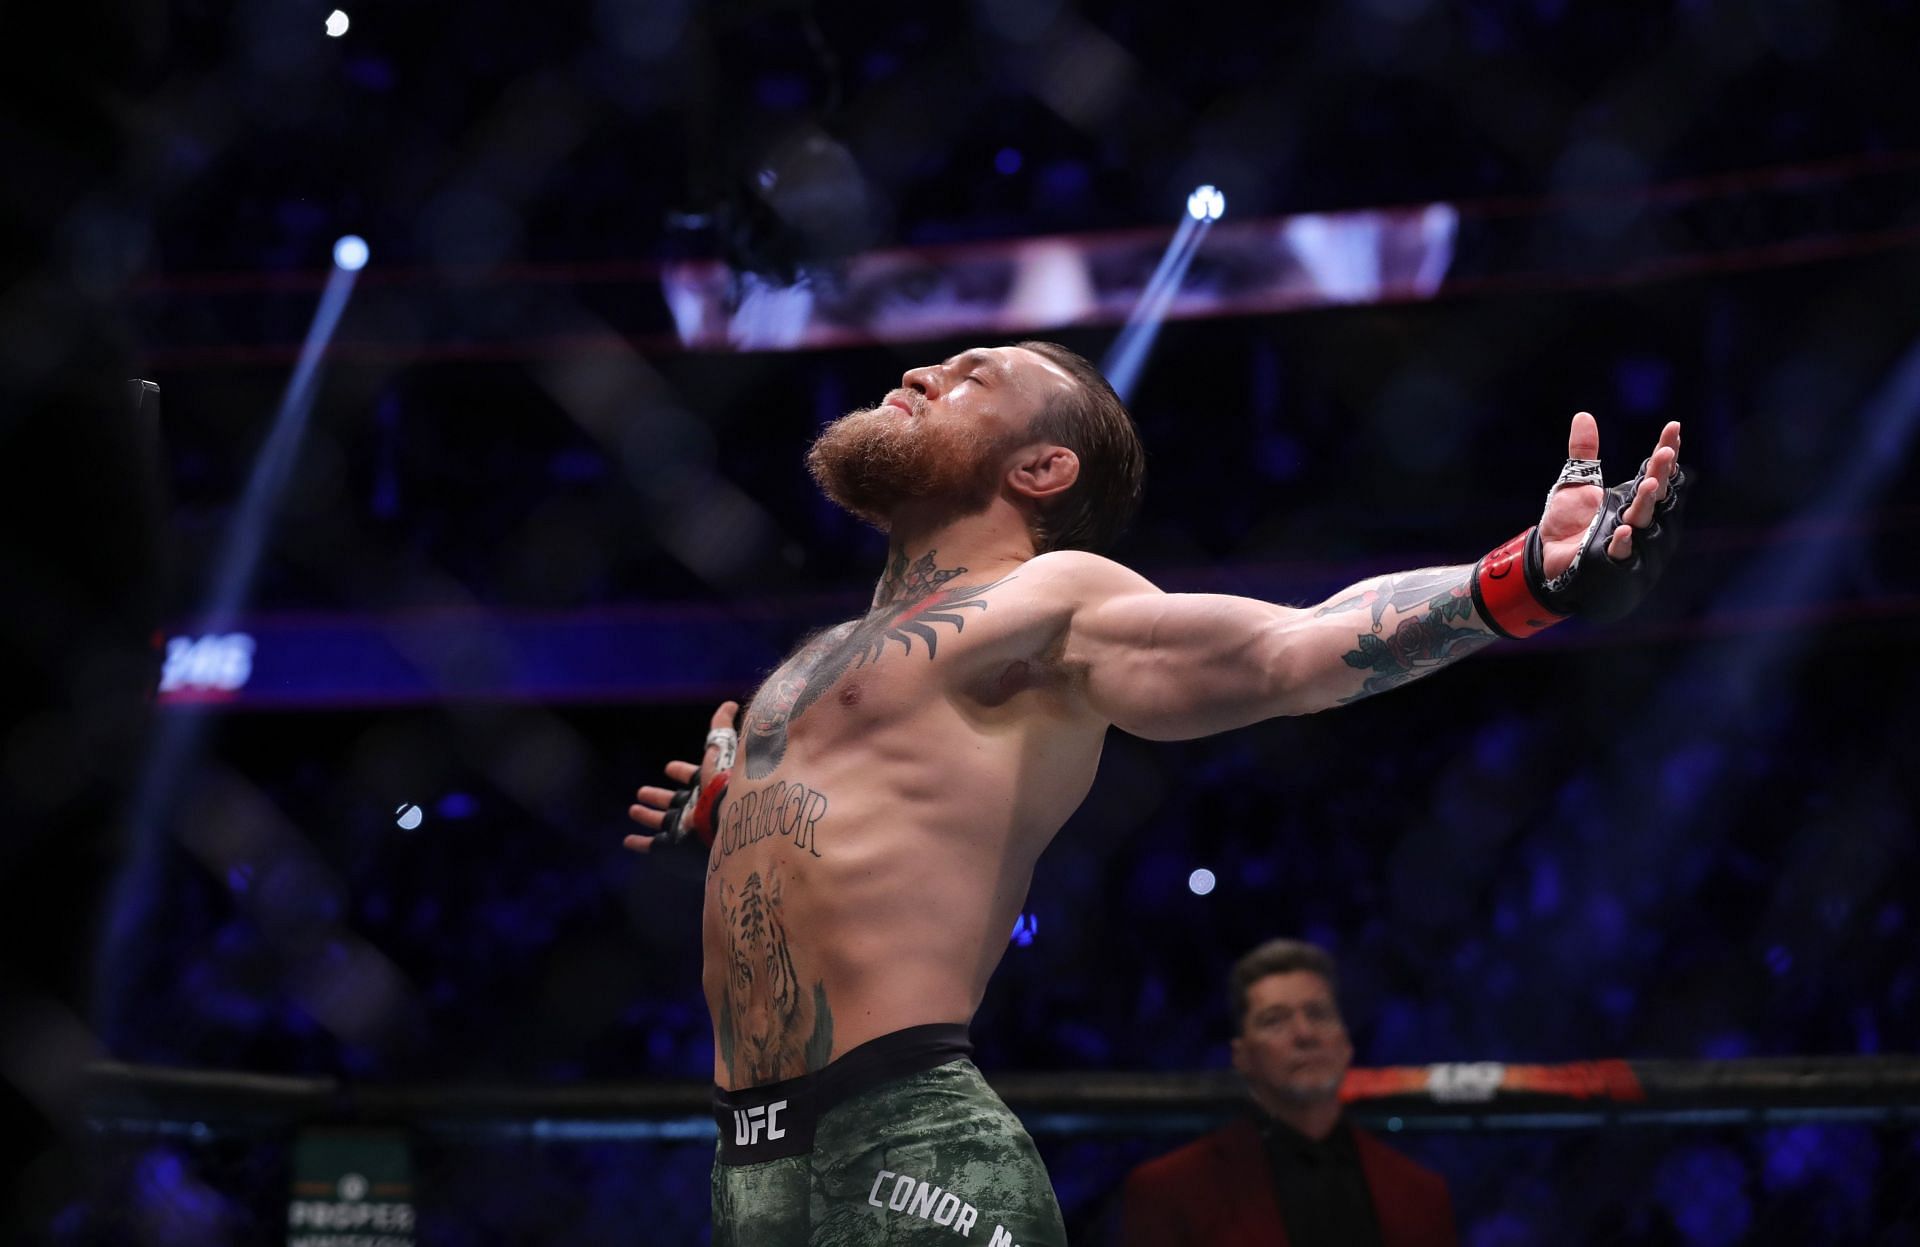 Despite no wins in over three years, Conor McGregor remains a huge star